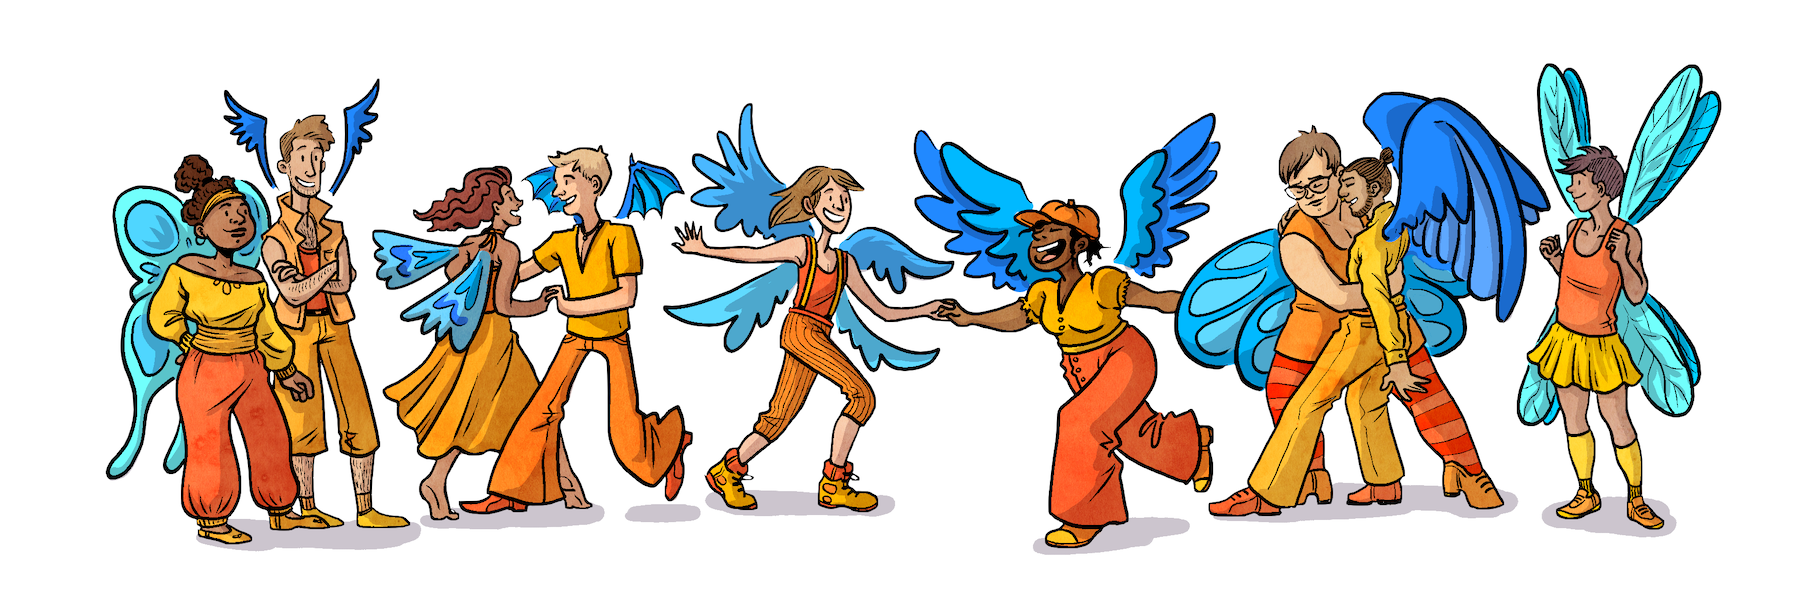 A set of diverse dancers wearing orange clothes and sporting blue wings.